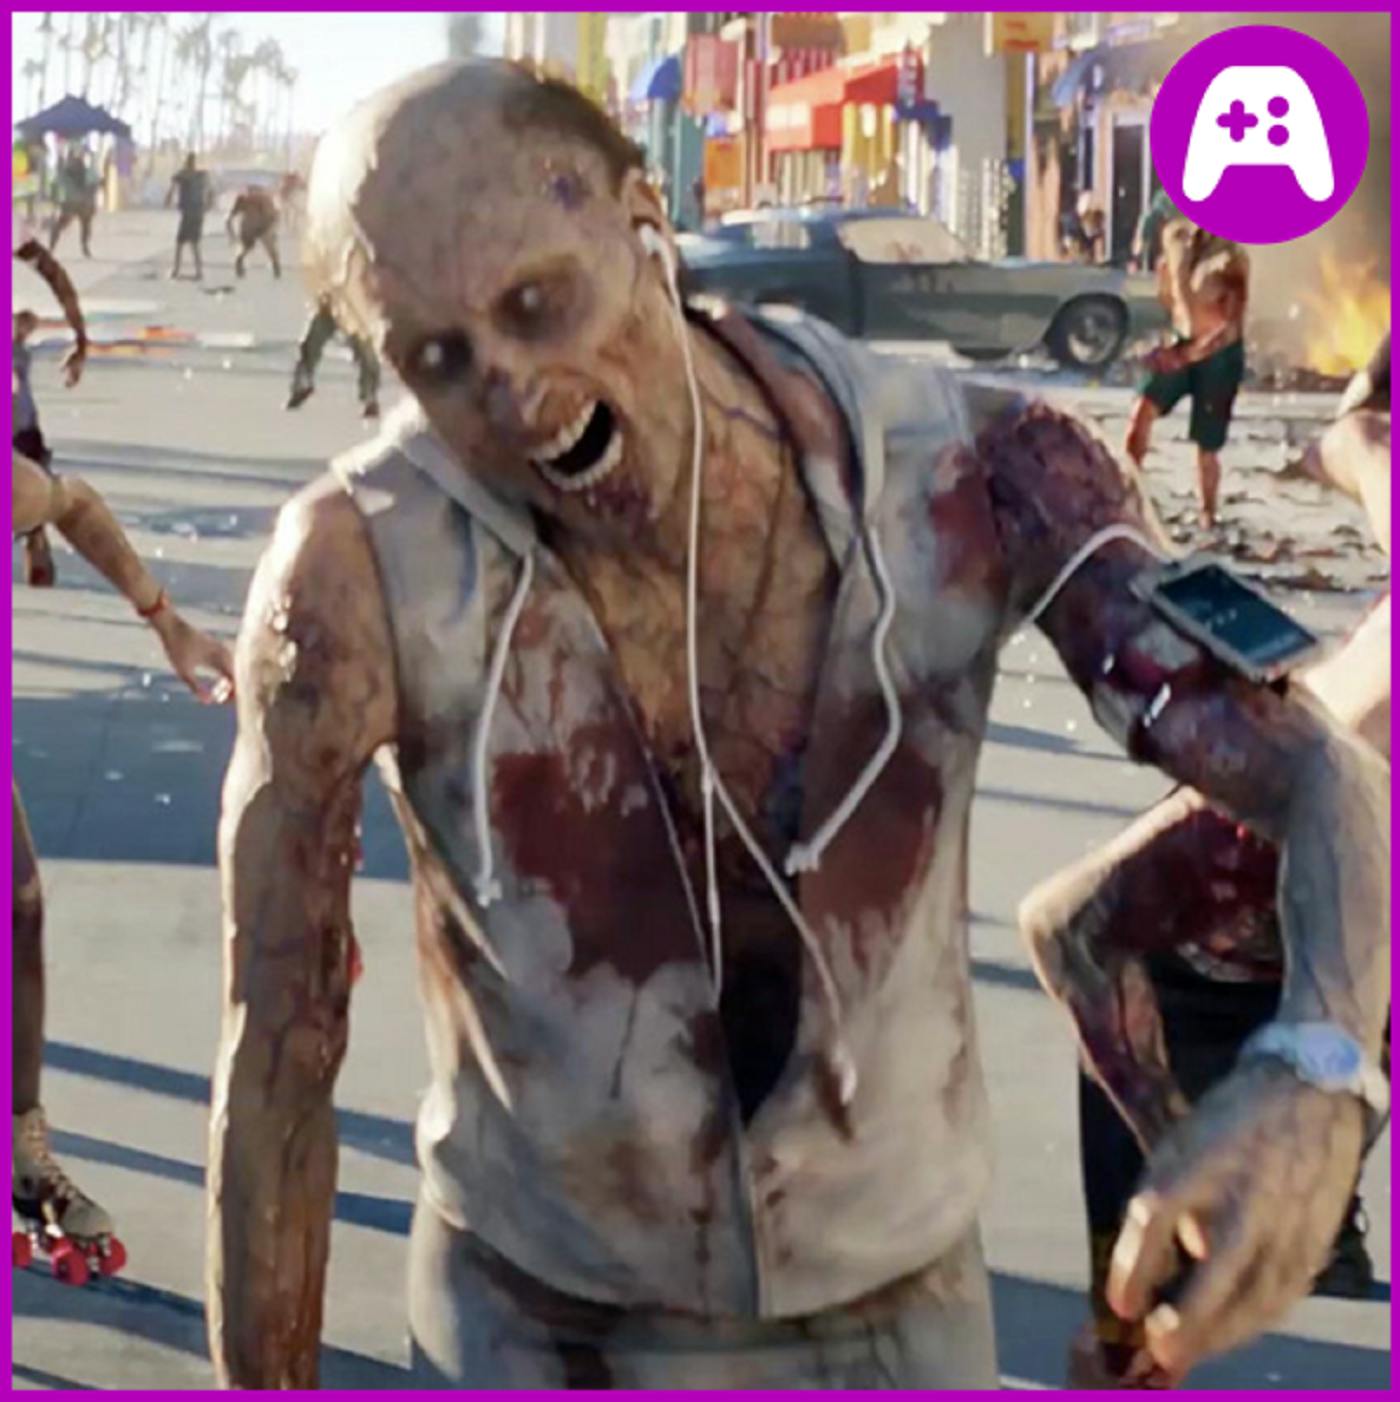 New Saints Row and Dead Island 2 Coming Soon? - What's Good Games (Ep. 118)